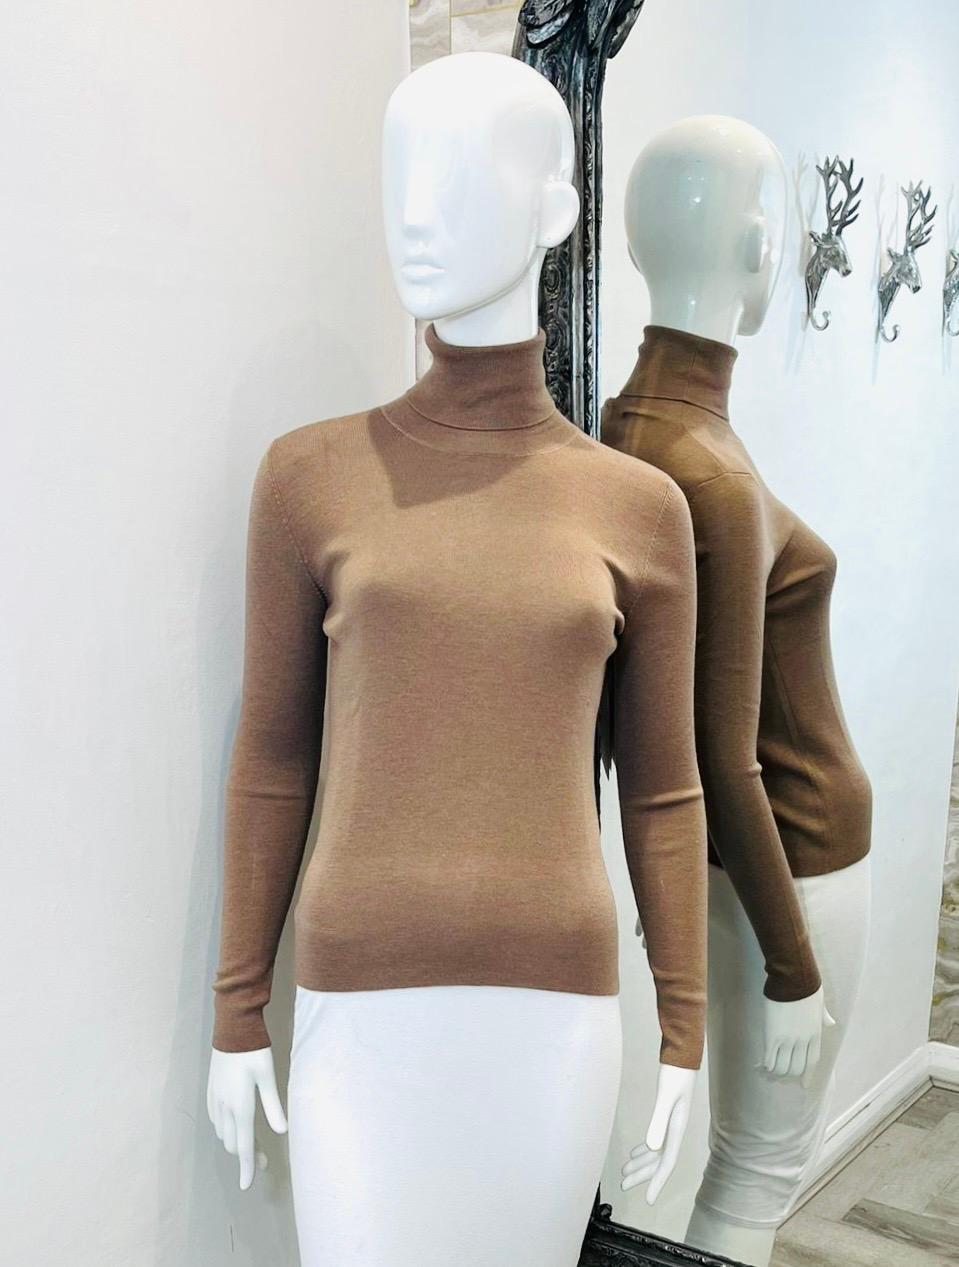 Prada Cashmere & Silk Rollneck Jumper

Light brown, luxurious soft jumper designed with roll-neckline.

Featuring fitted silhouette and long sleeves. Rrp £612

Size – 40IT

Condition – Excellent

Composition – 70% Cashmere, 30% Silk (Labels missing